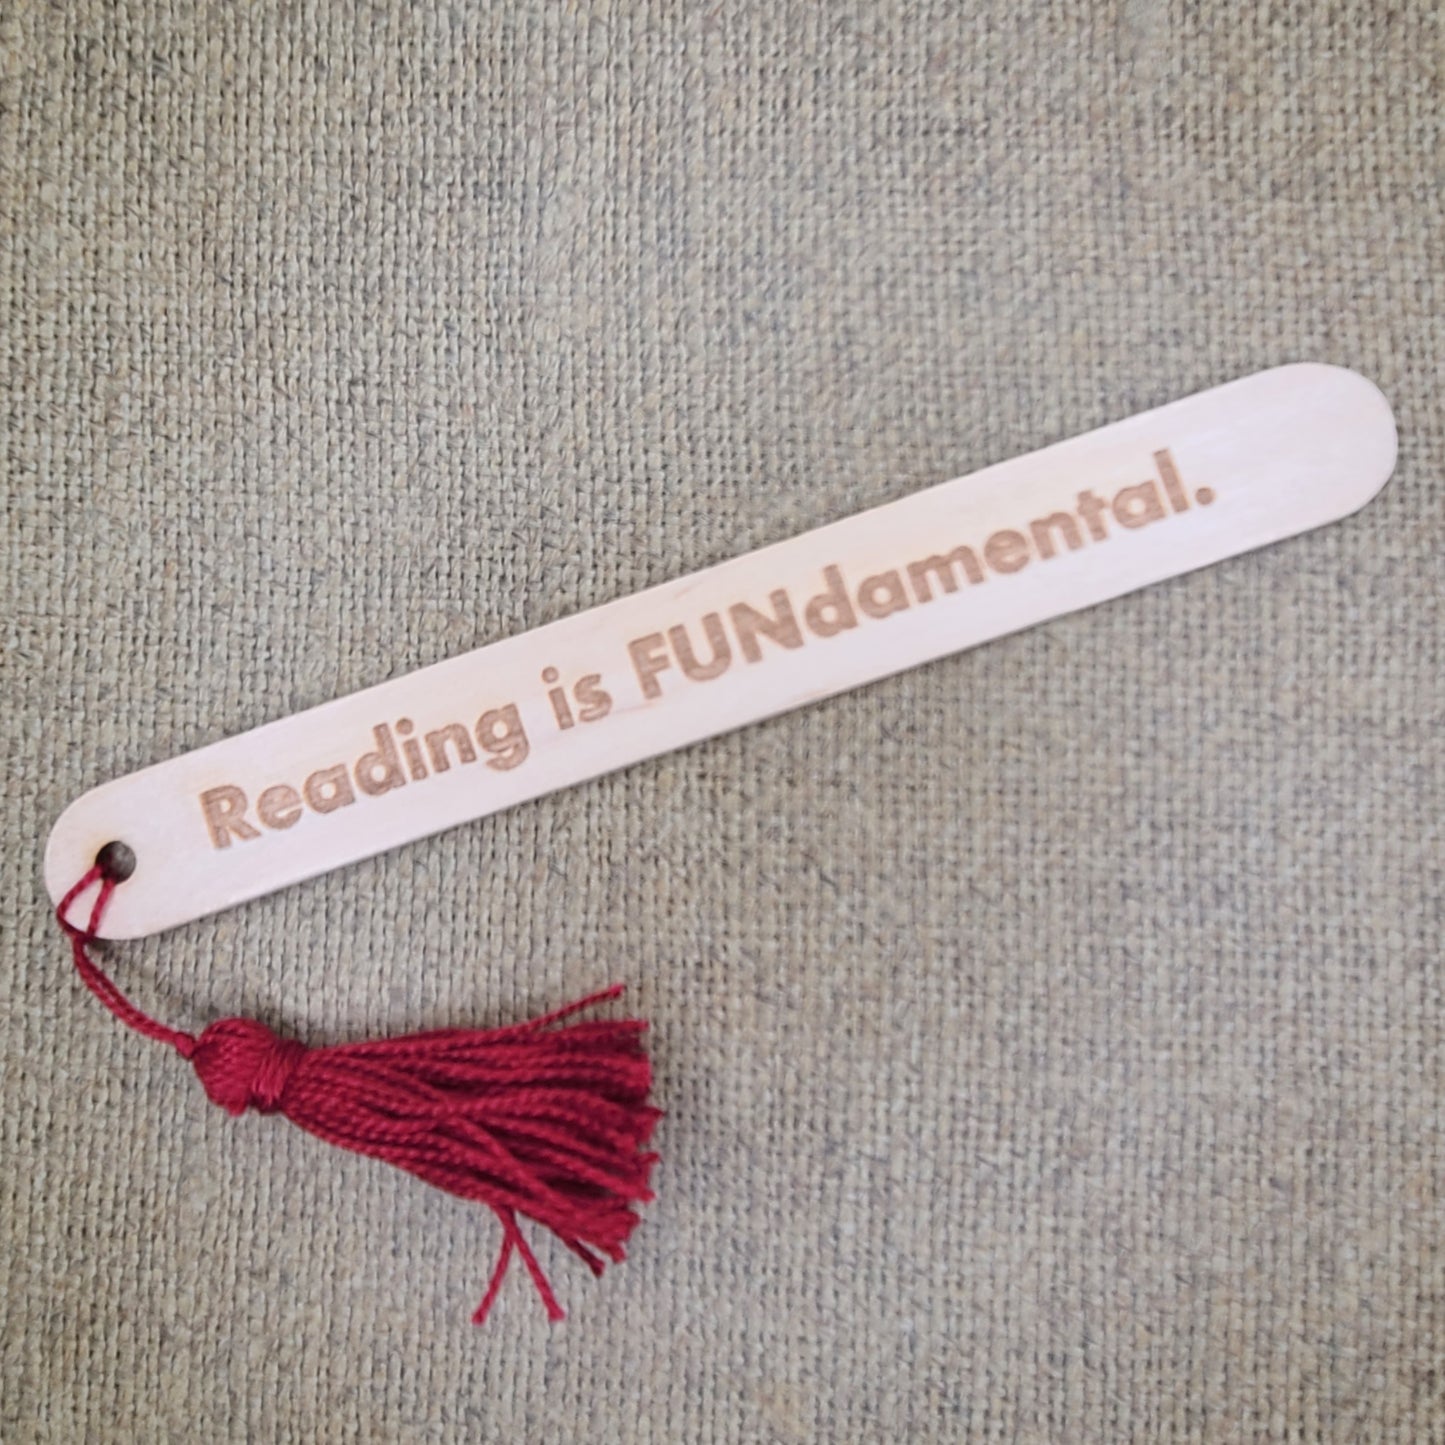 "Reading is FUNdamental." popsicle bookmark